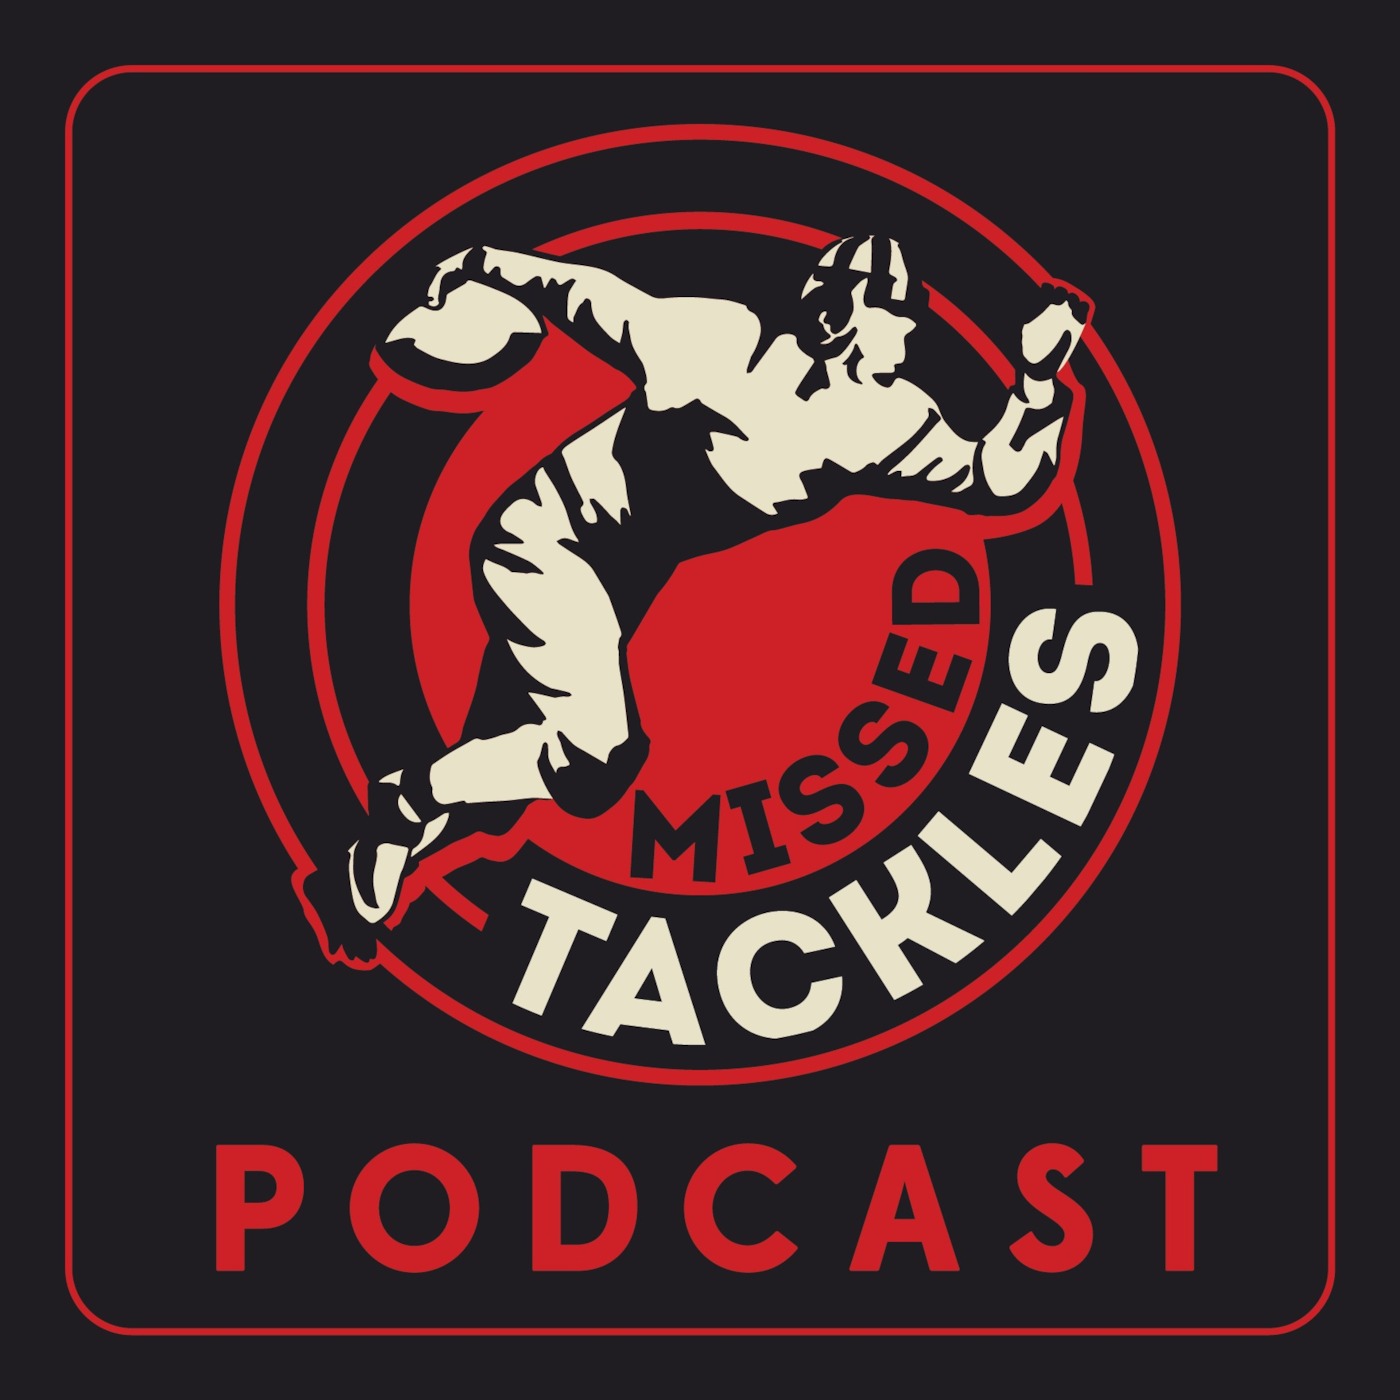 Missed Tackles Podcast - Justin and Kris